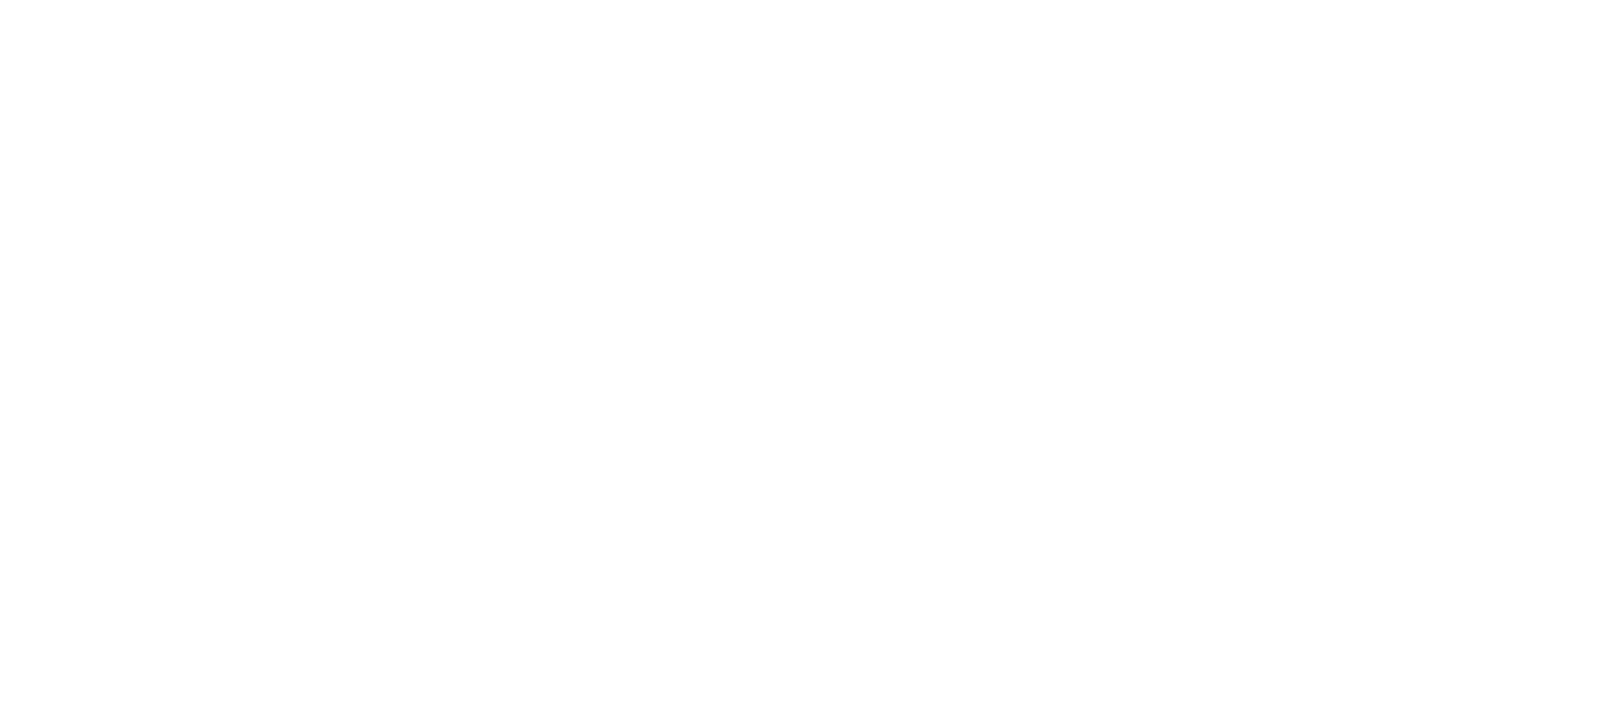 Home Care Delivered 25 Years of Service